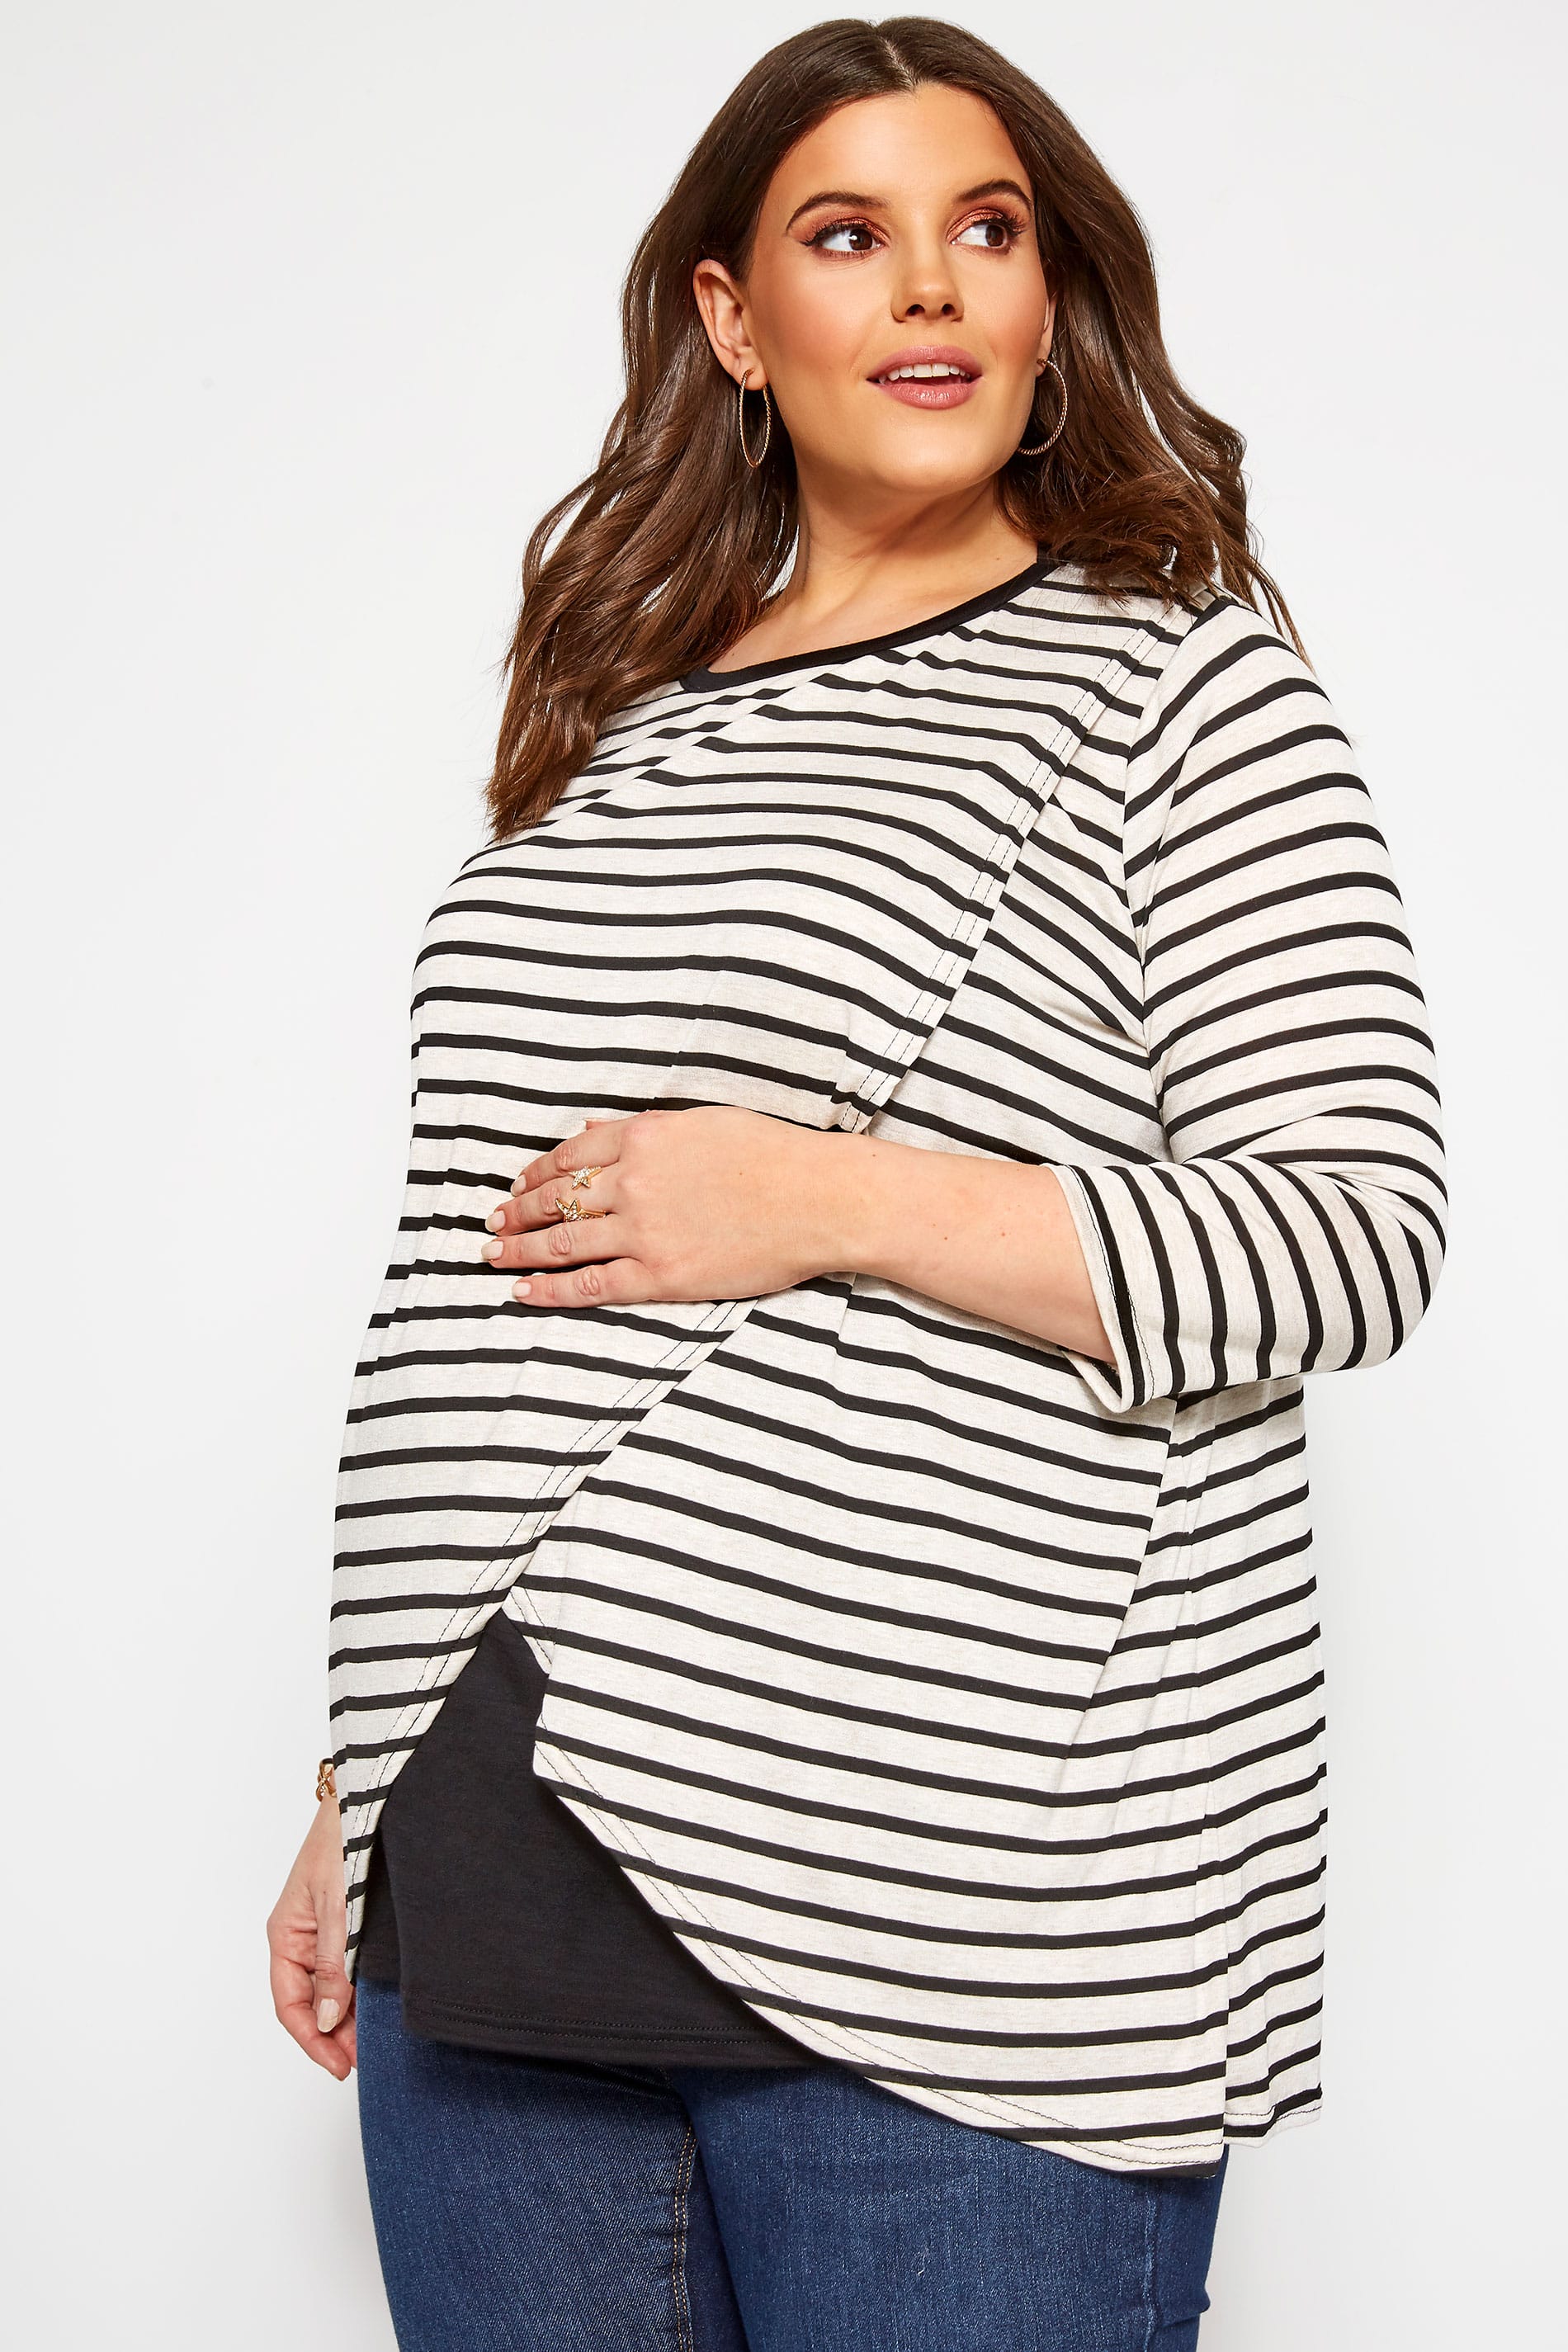 black and white striped maternity top